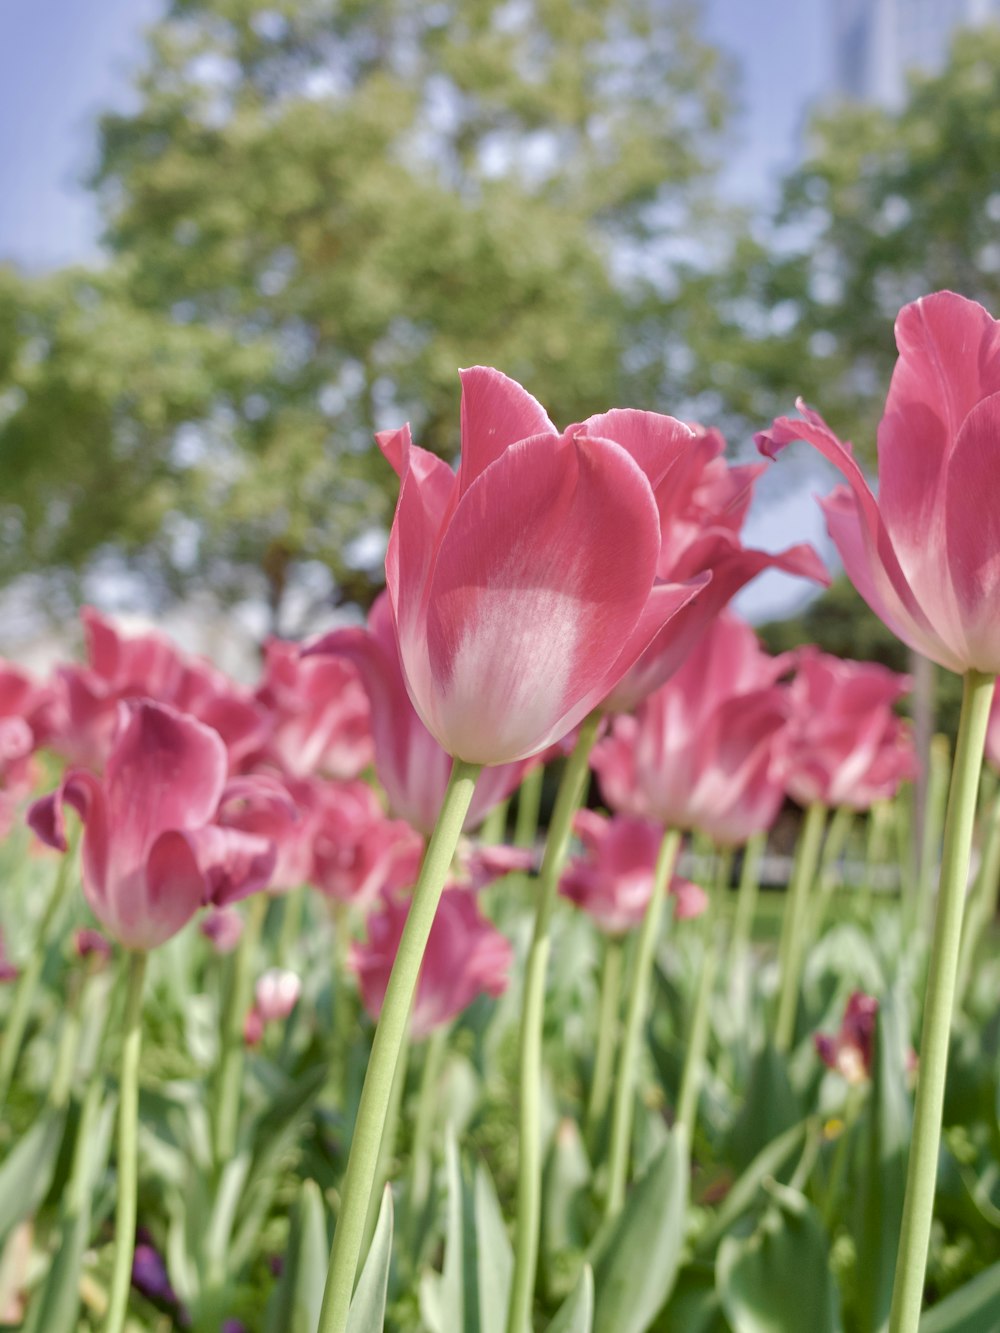 a field of pink tulips with trees in the background